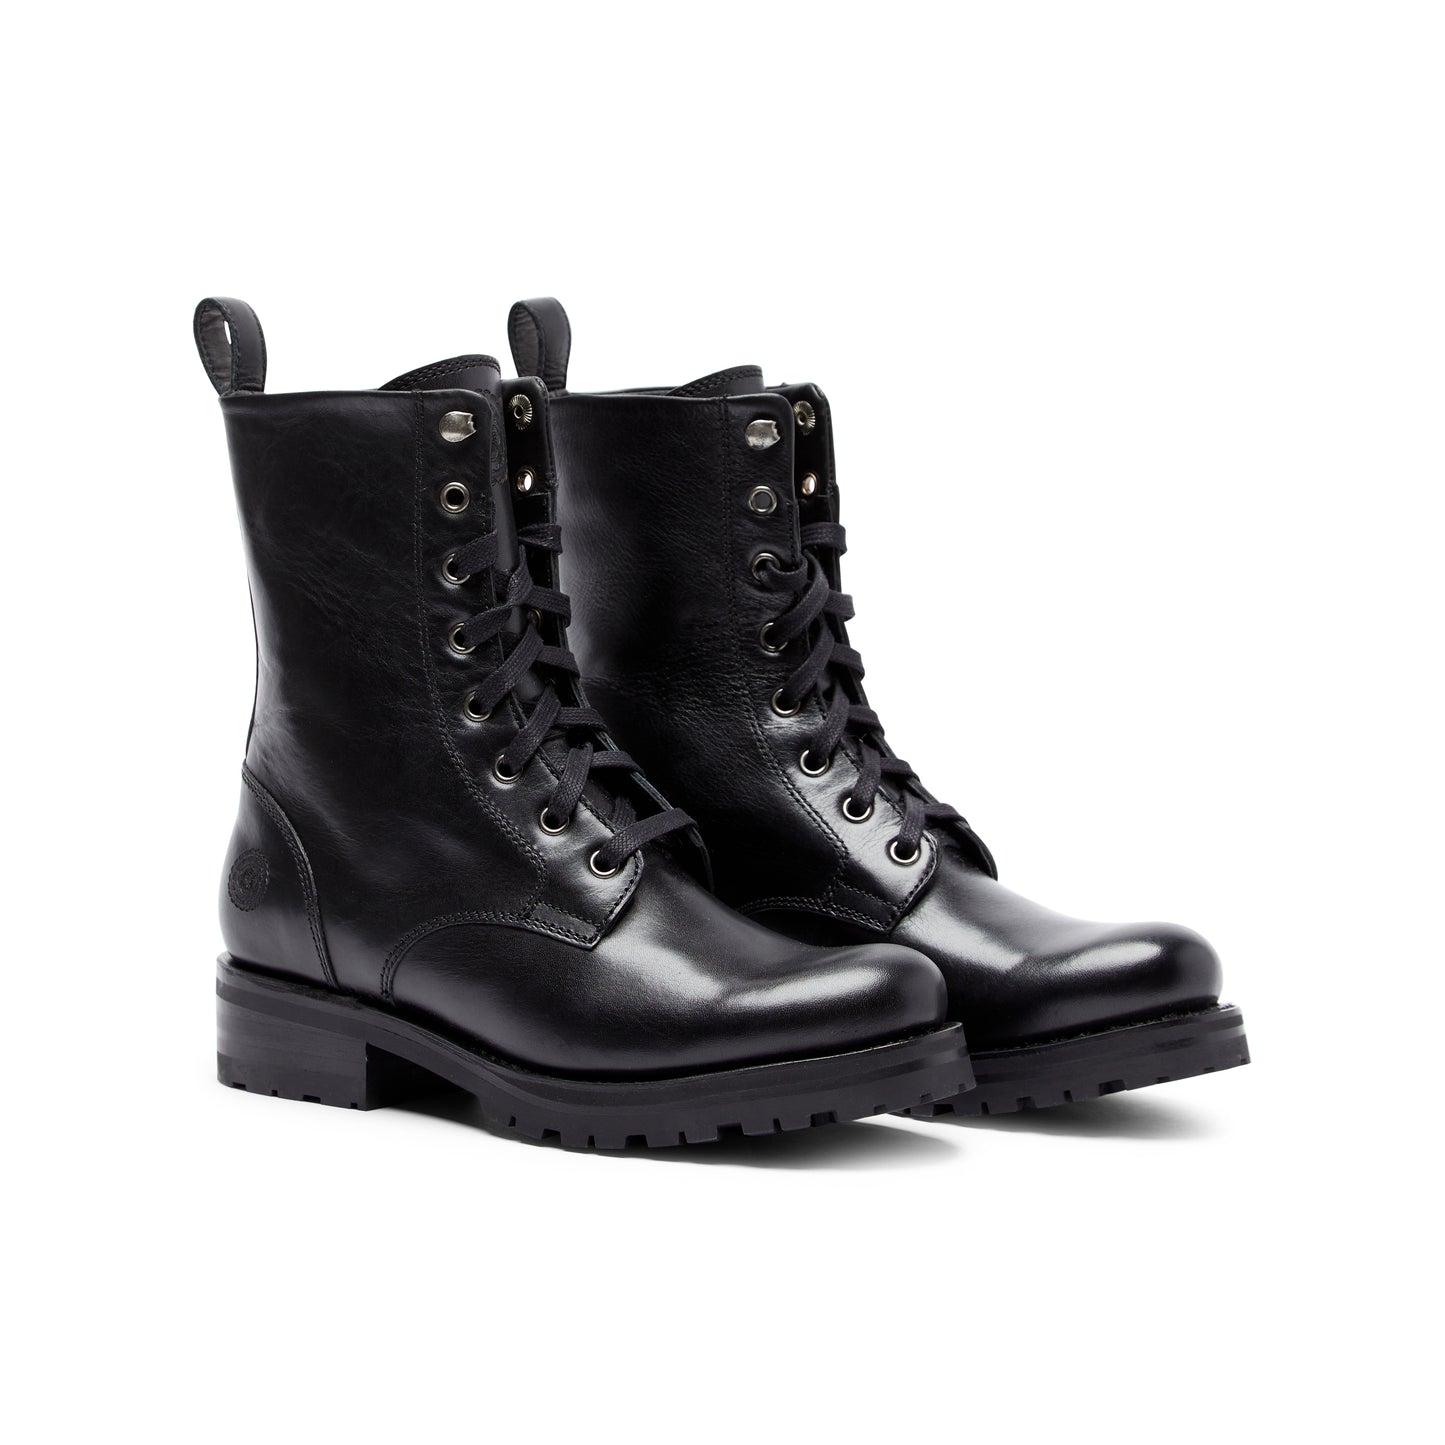 Ranch Road Boots - Poppy Combat - Black - Front Pair